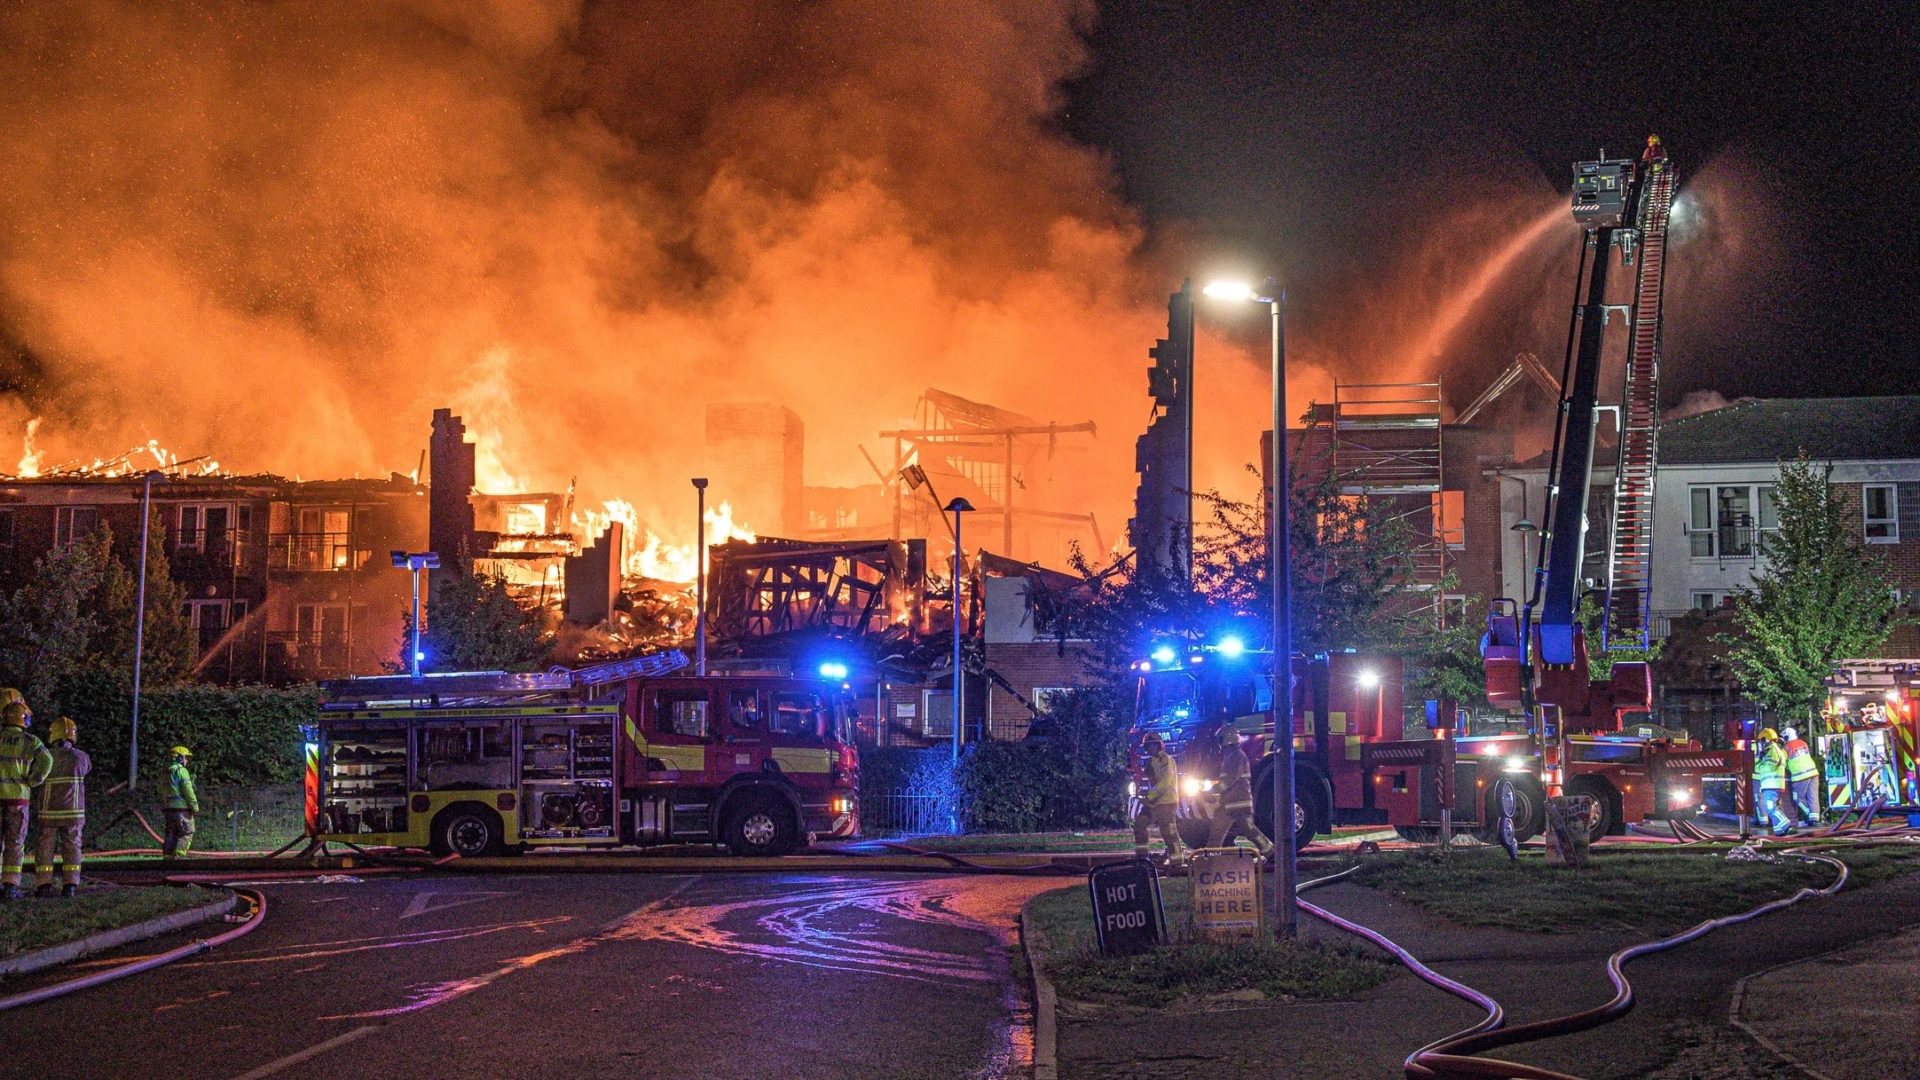 The Beechmere care home fire in August 2019 (image: Cheshire Fire and Rescue Service)